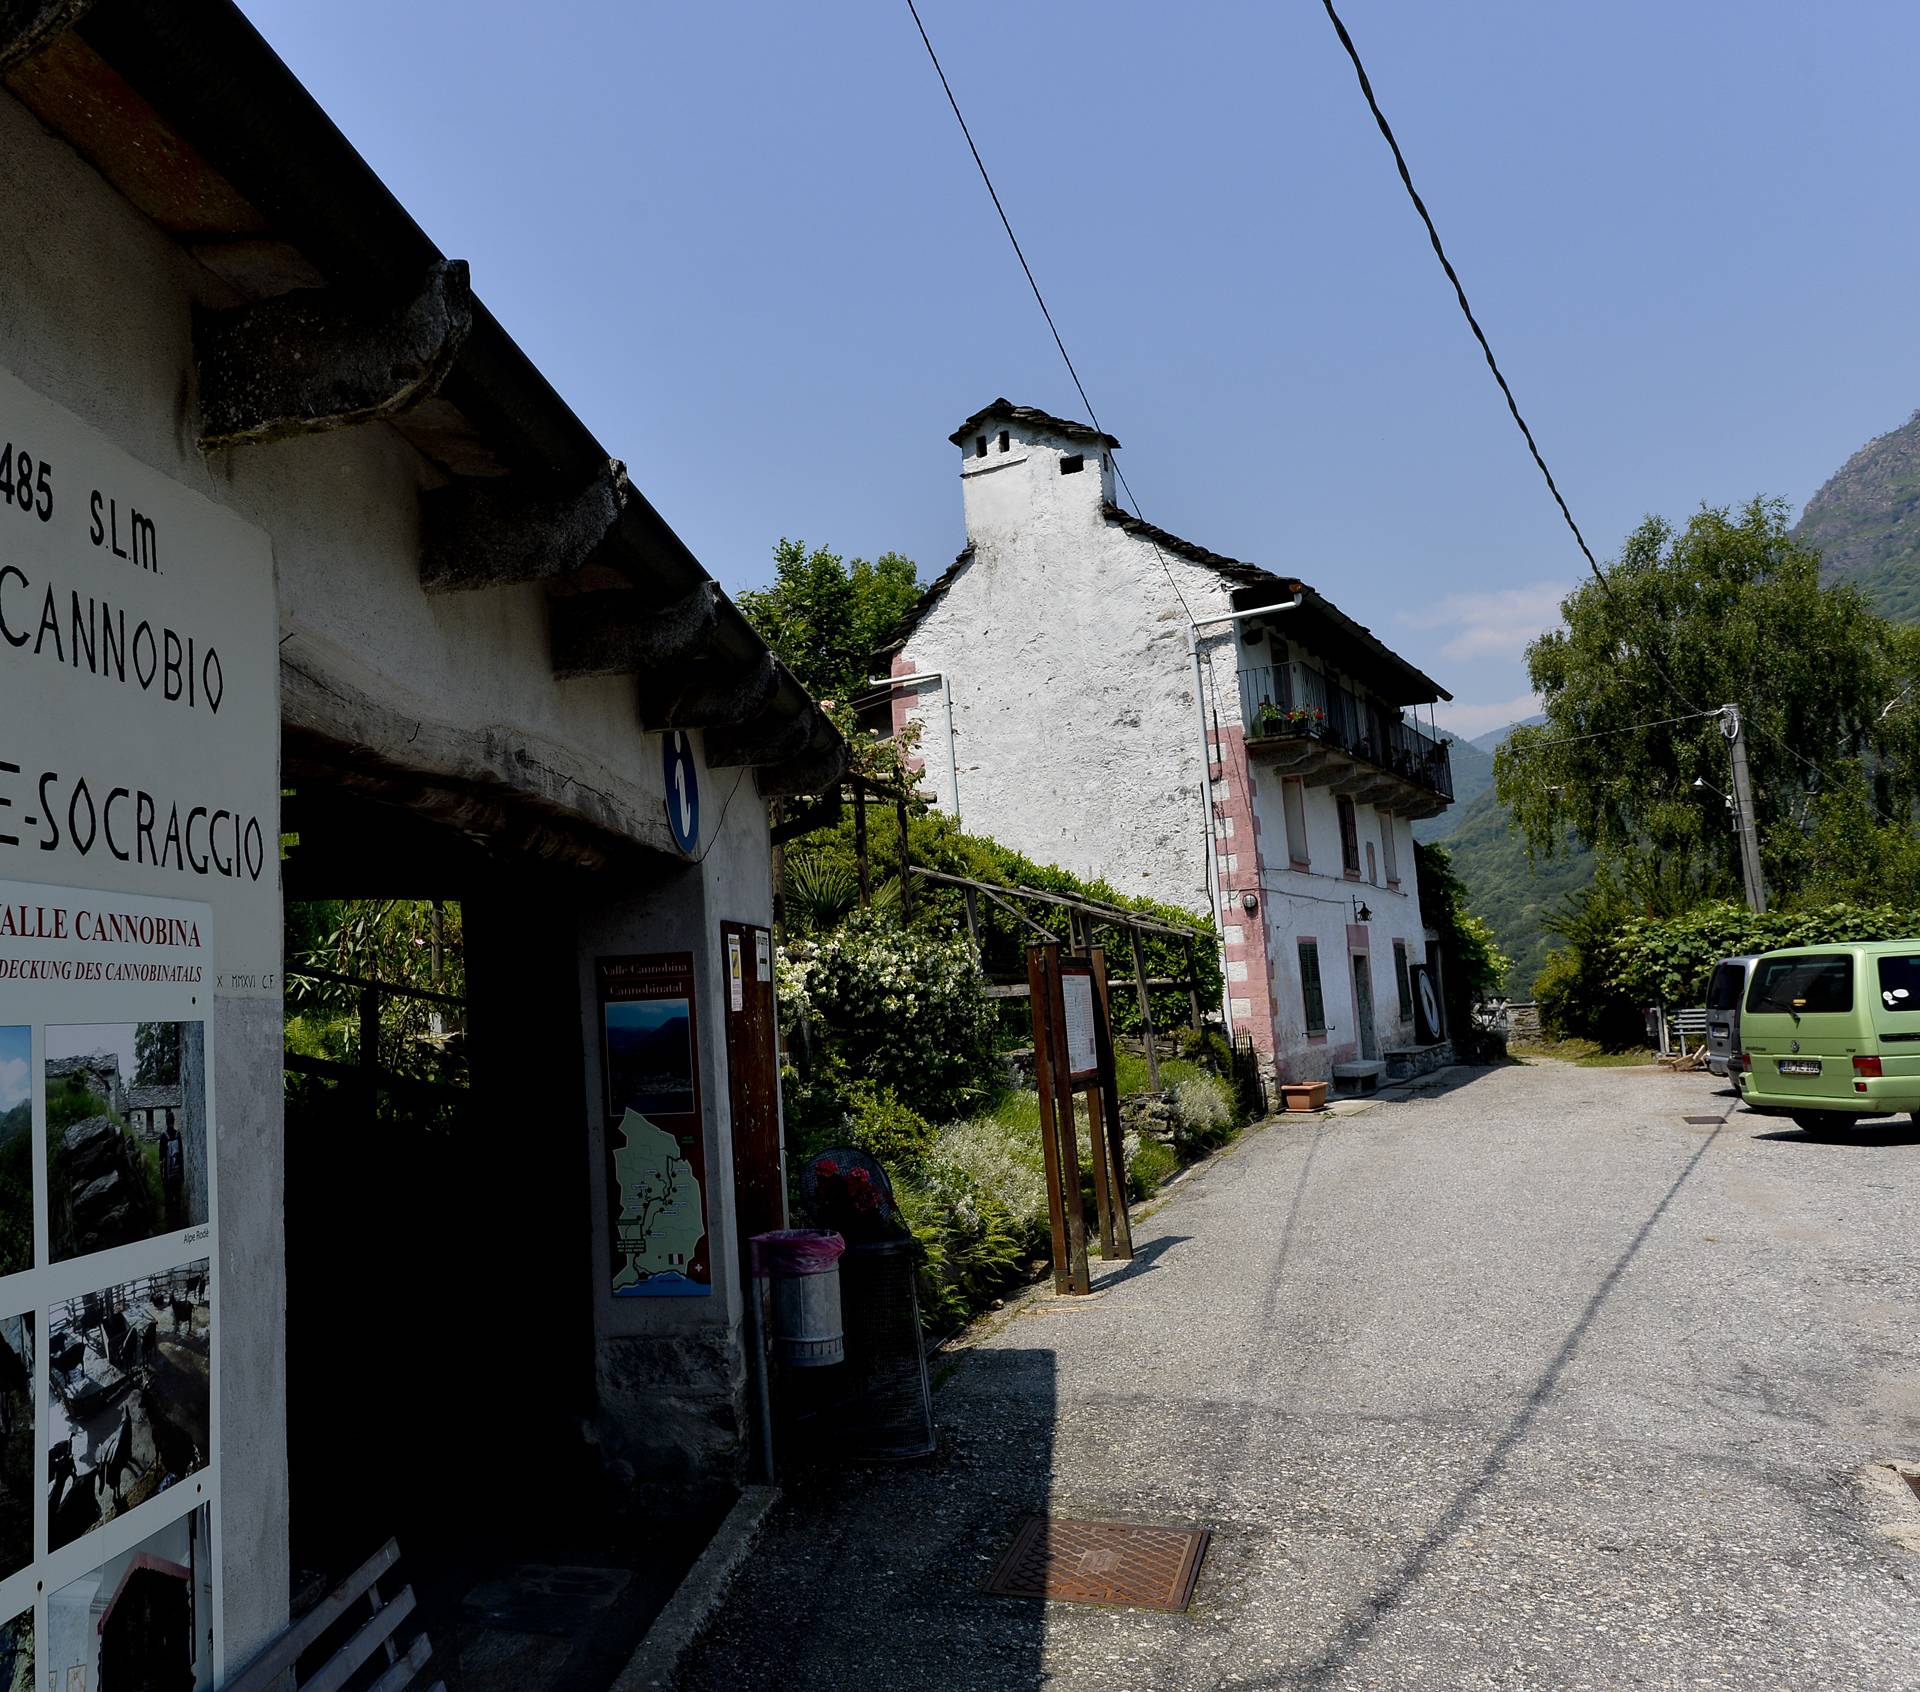 Paolina Grassi, the only inhabitant of the small village of Socraggio in the Cannobina Valley